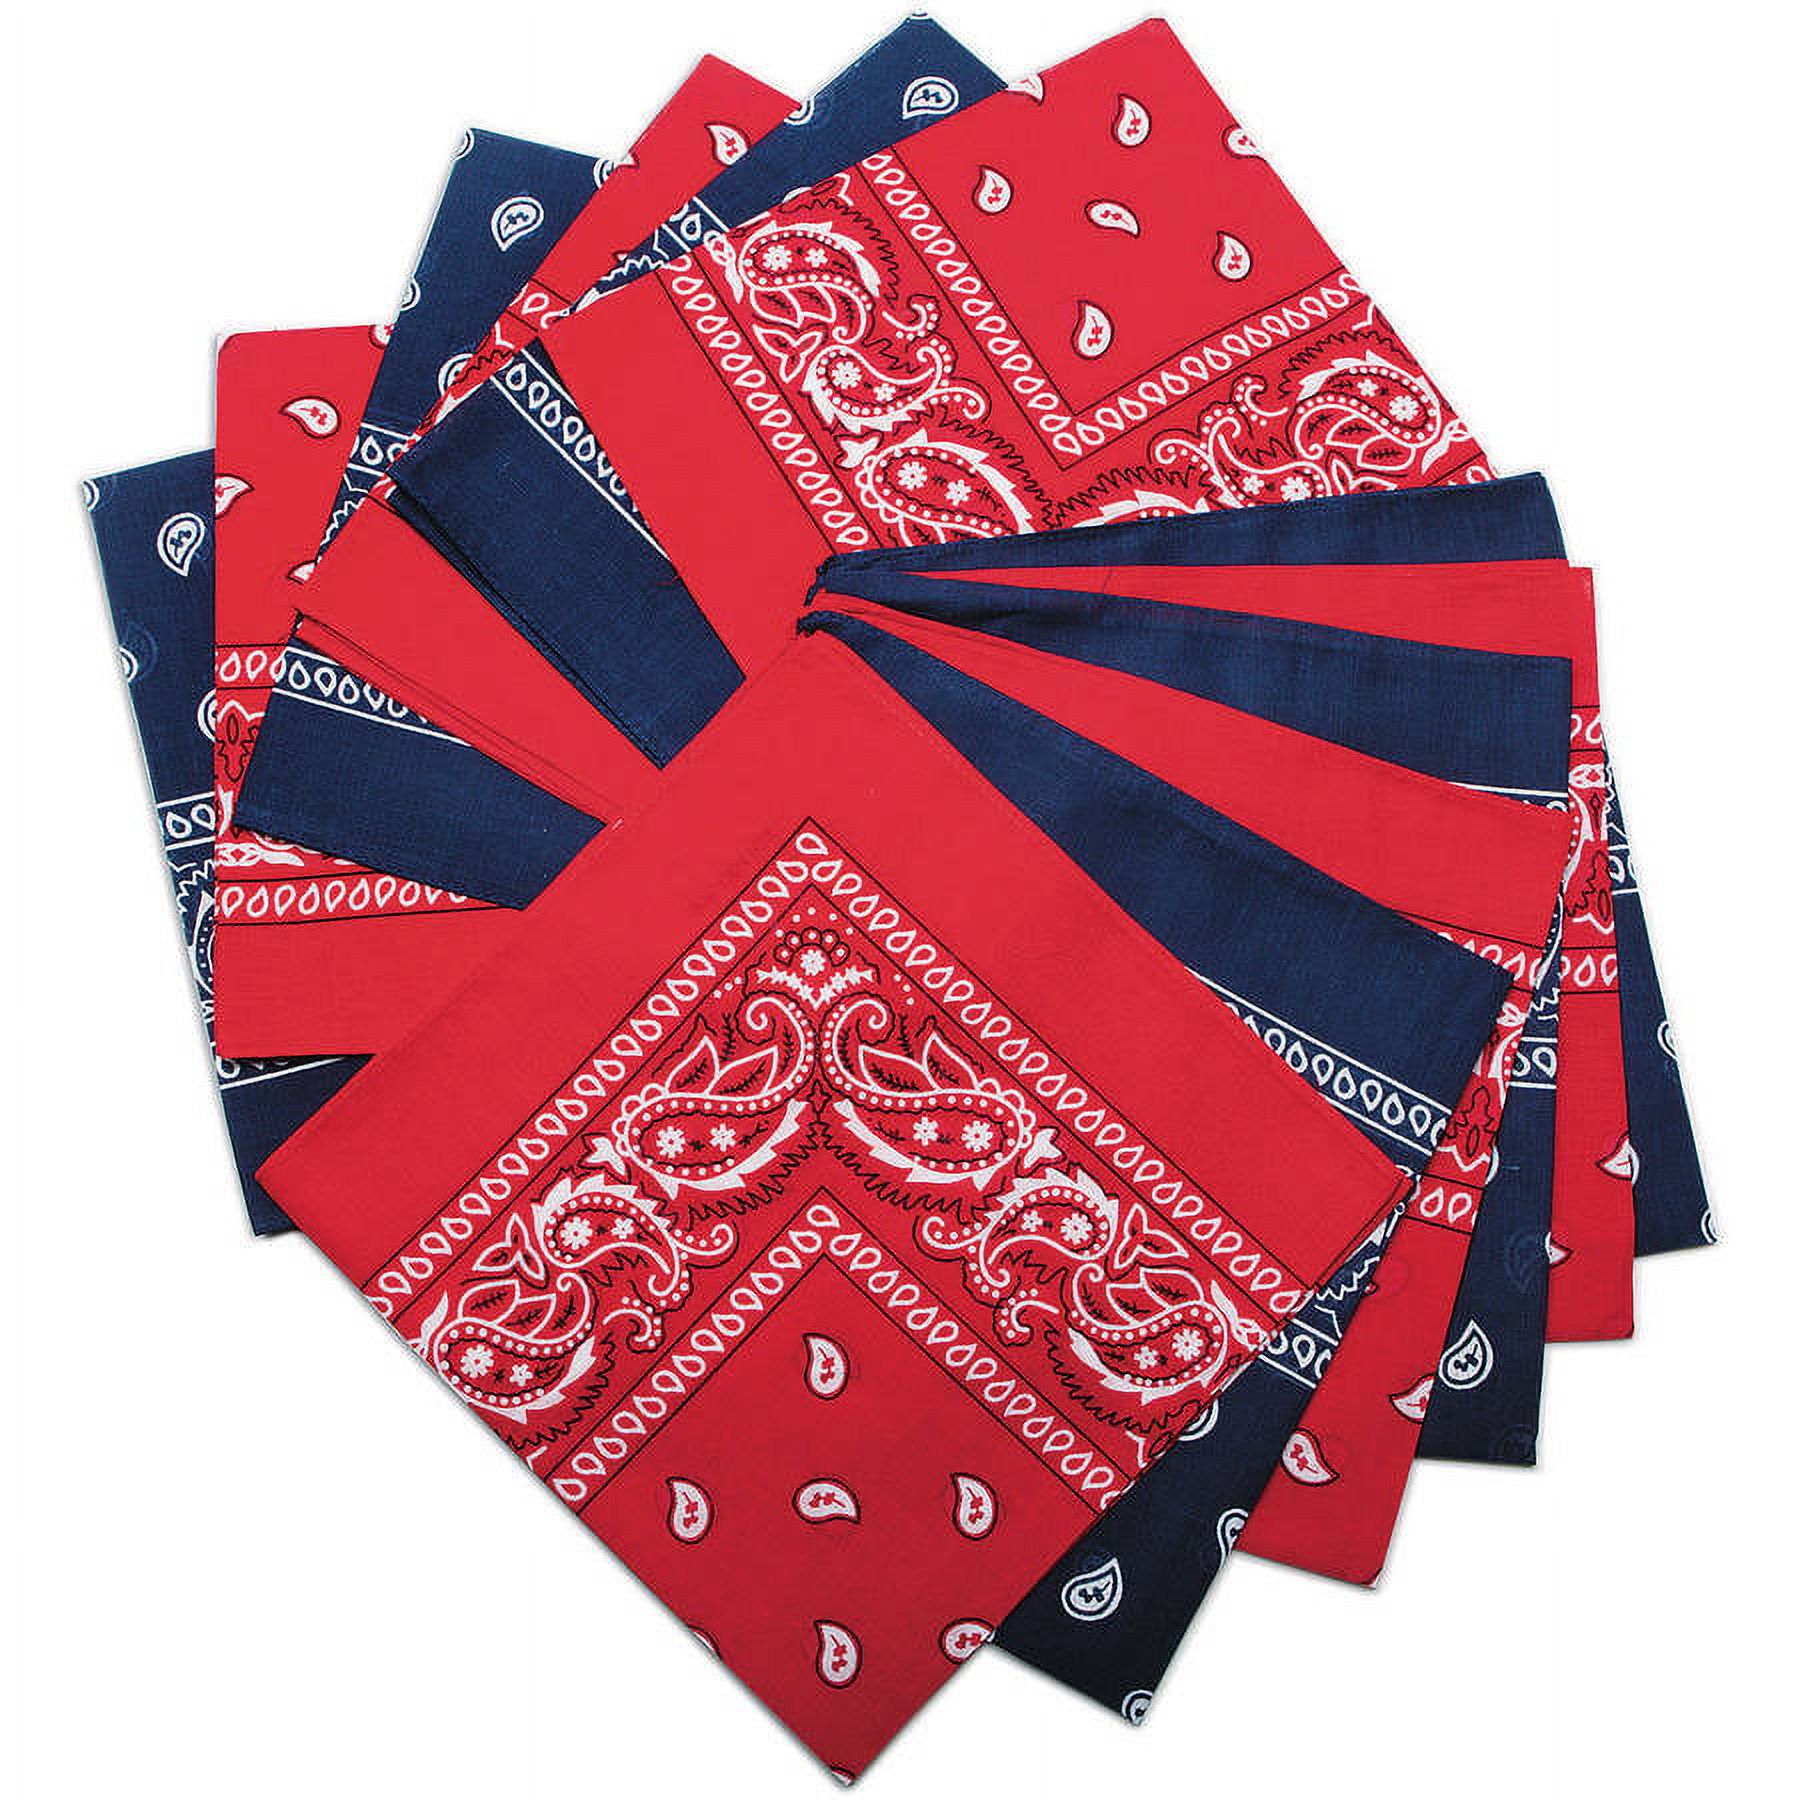 Bandanas, Red/Blue Western, Pack of 12 - image 1 of 1